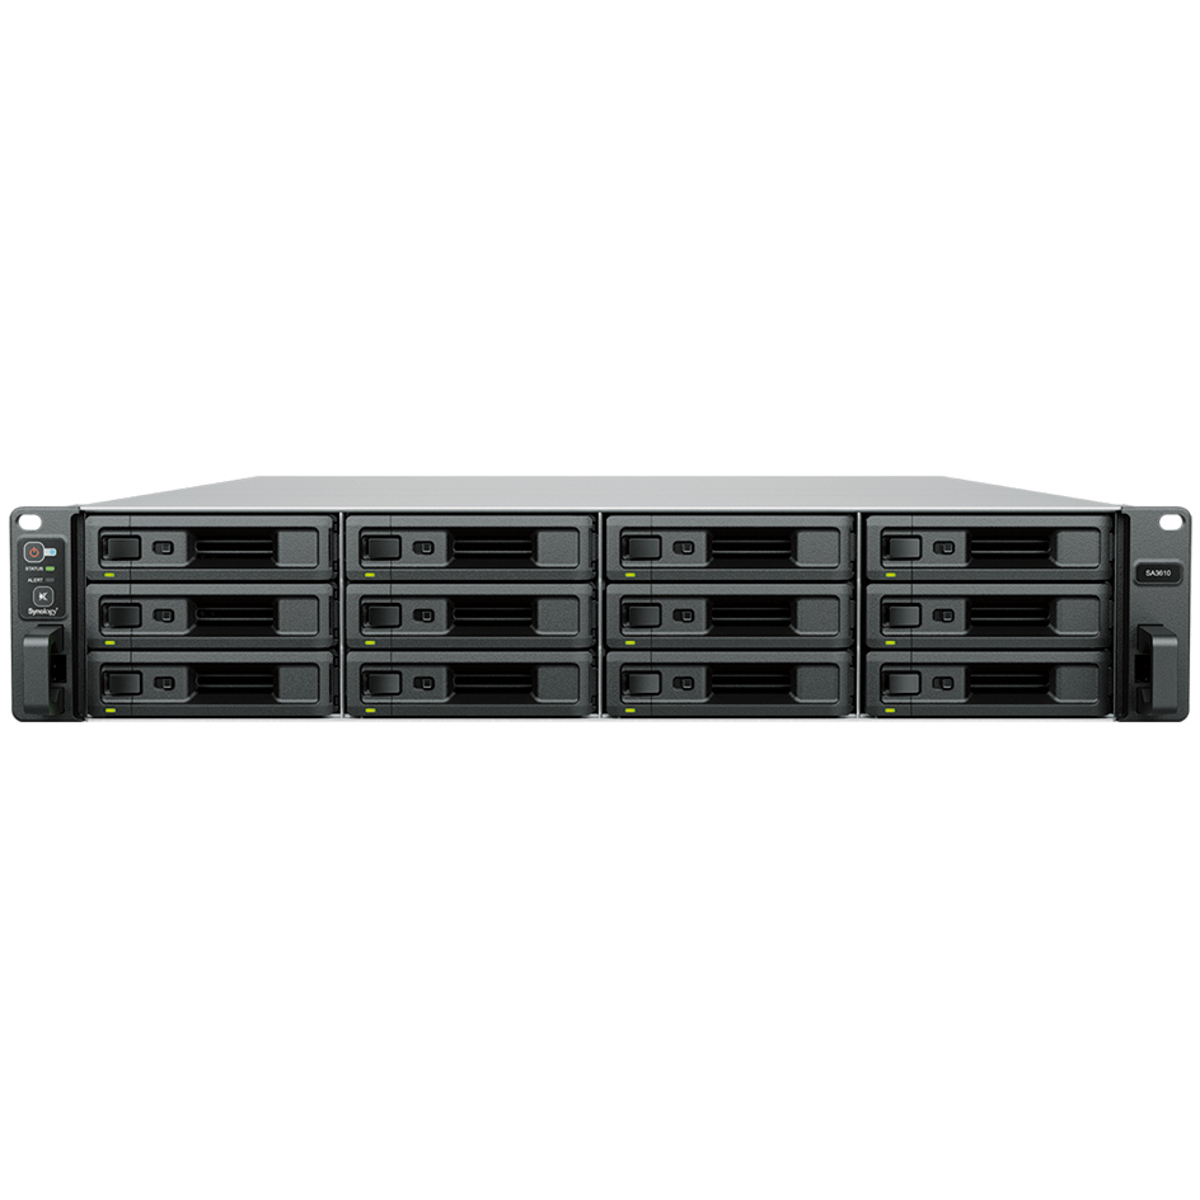 Synology RackStation SA3610 144tb 12-Bay RackMount Large Business / Enterprise NAS - Network Attached Storage Device 12x12tb Synology Plus Series HAT3310-12T 3.5 7200rpm SATA 6Gb/s HDD NAS Class Drives Installed - Burn-In Tested RackStation SA3610